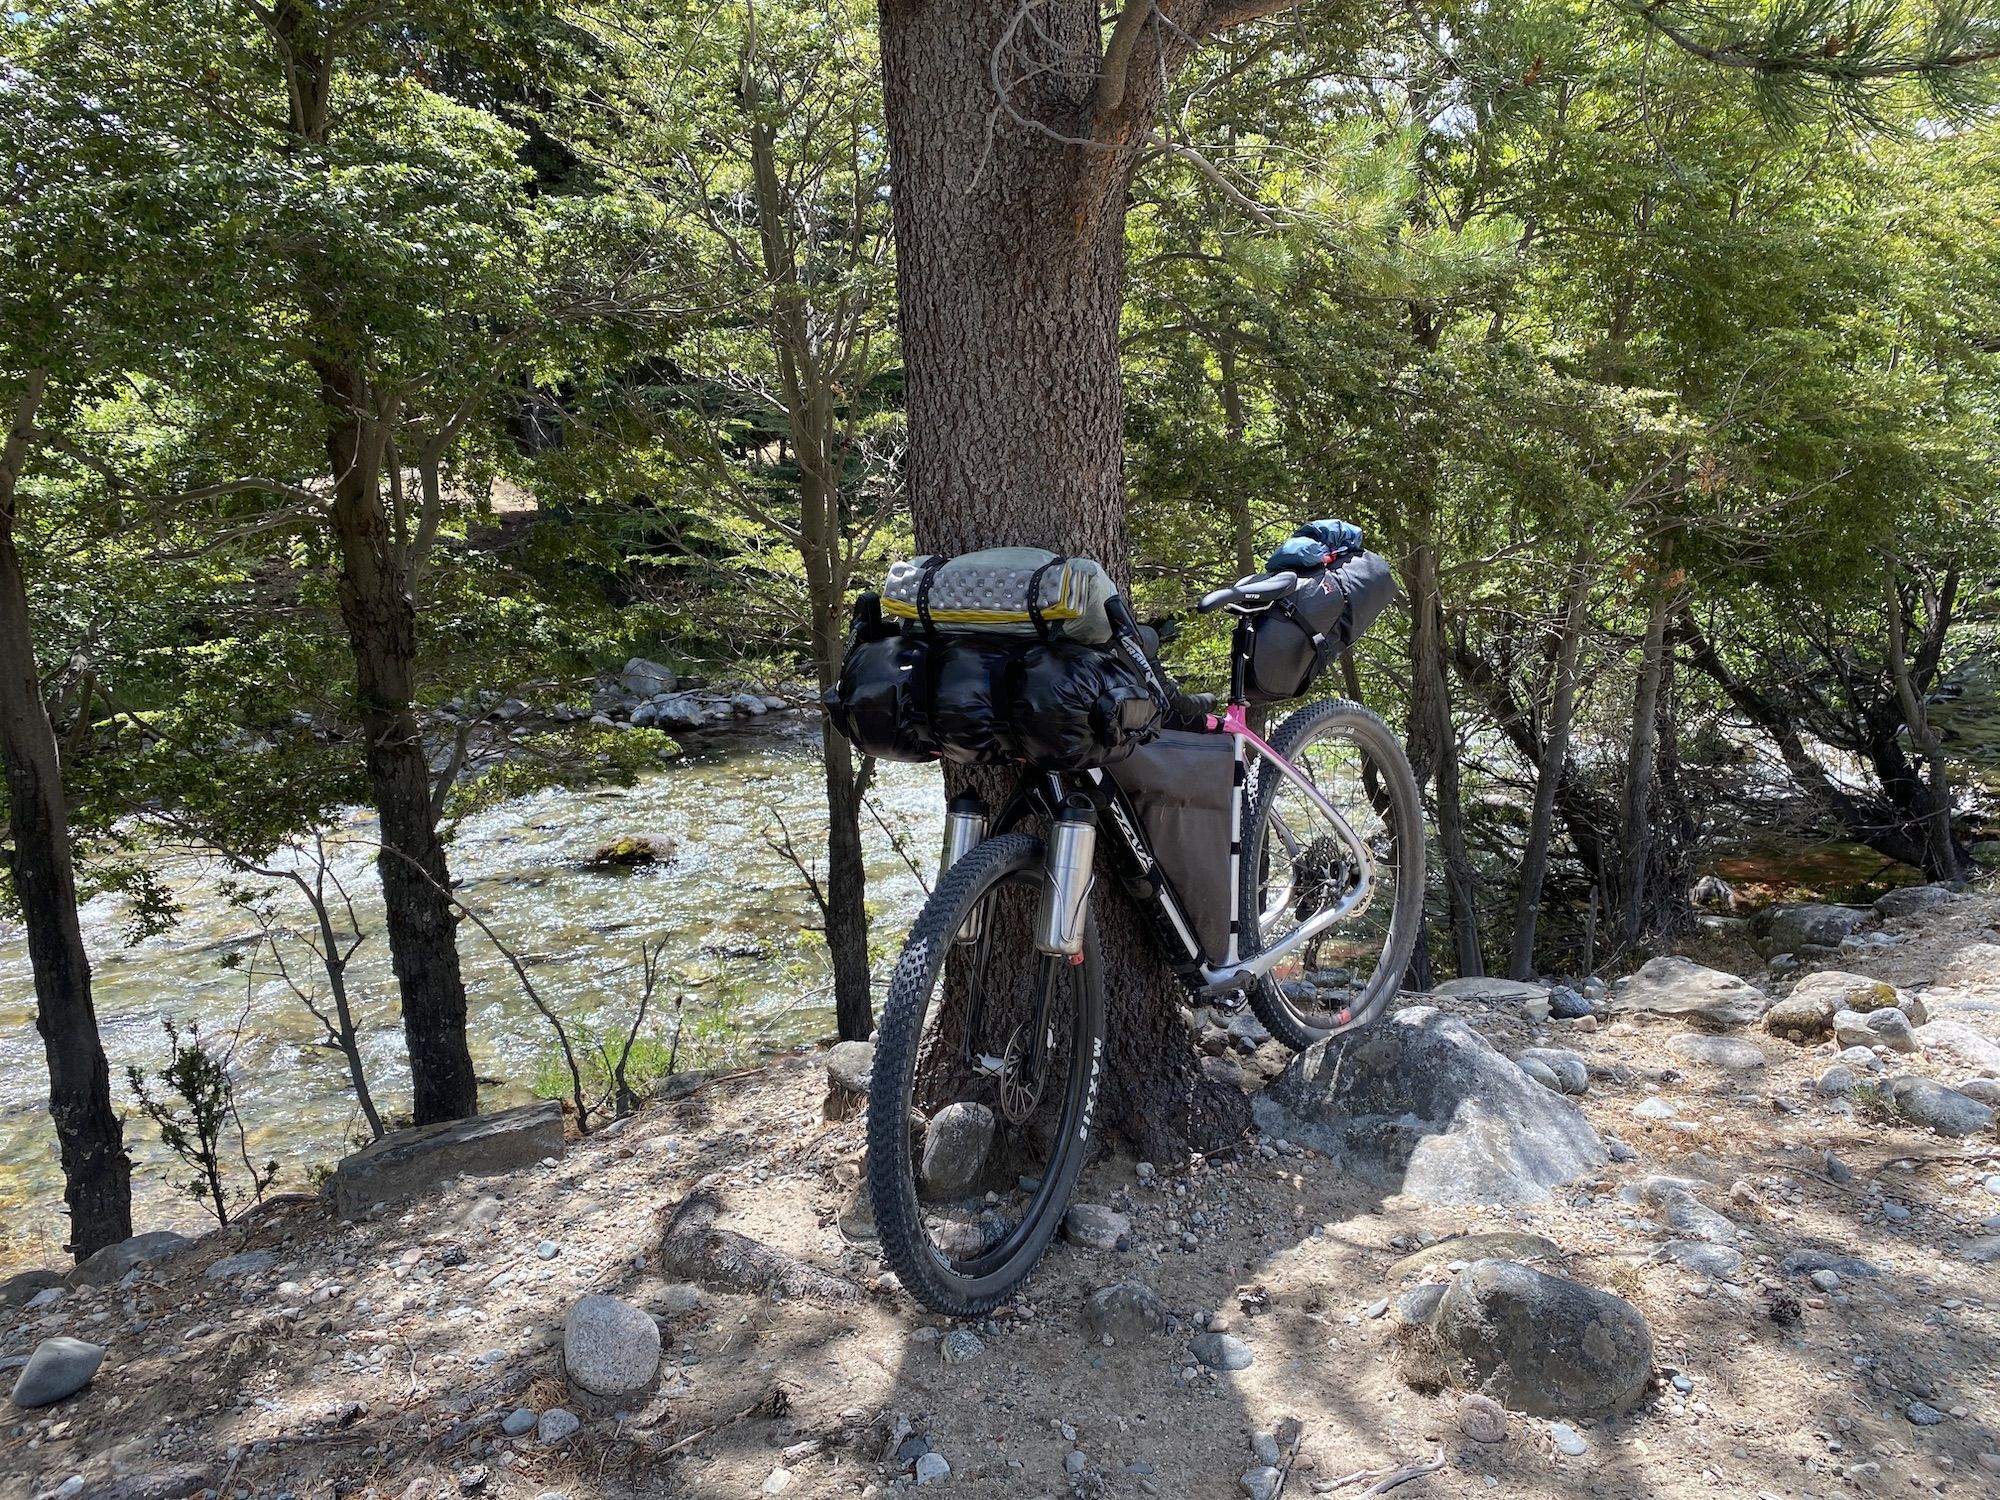 Bike leaning against a tree next to a river.